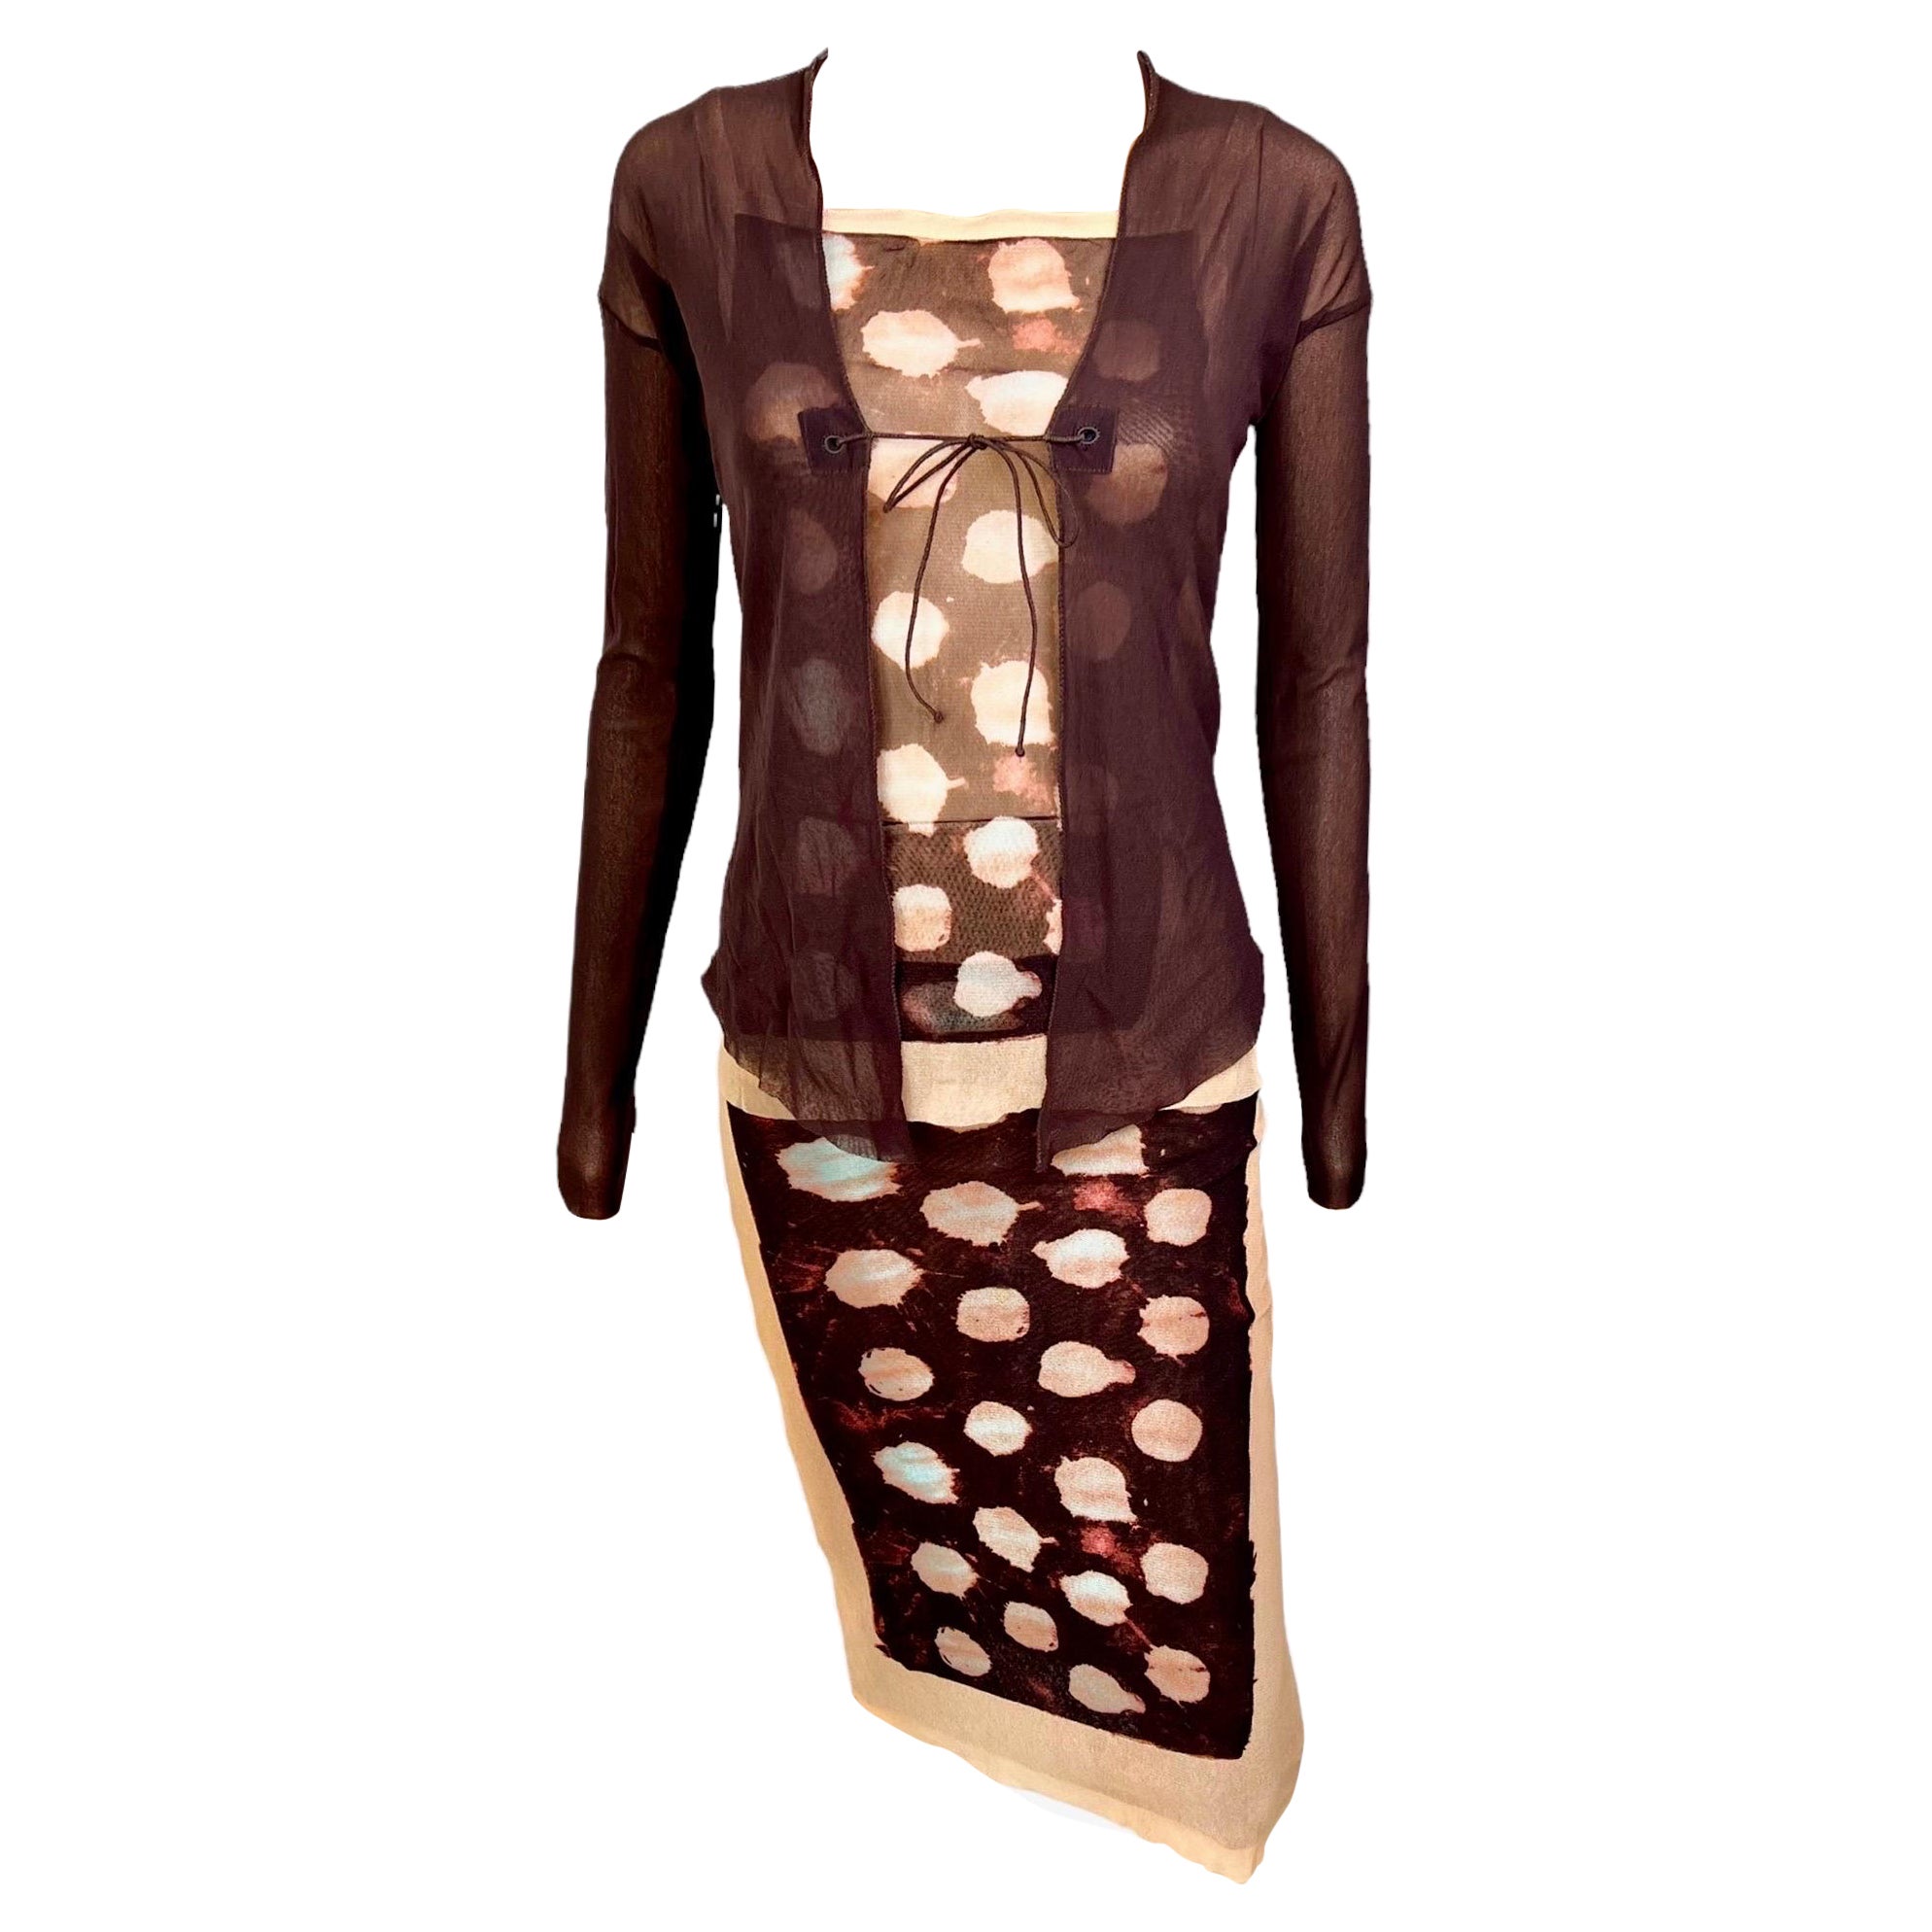 Jean Paul Gaultier S/S 2001 Sheer Polka Dot Cardigan Top and Skirt 3 Piece  Set For Sale at 1stDibs